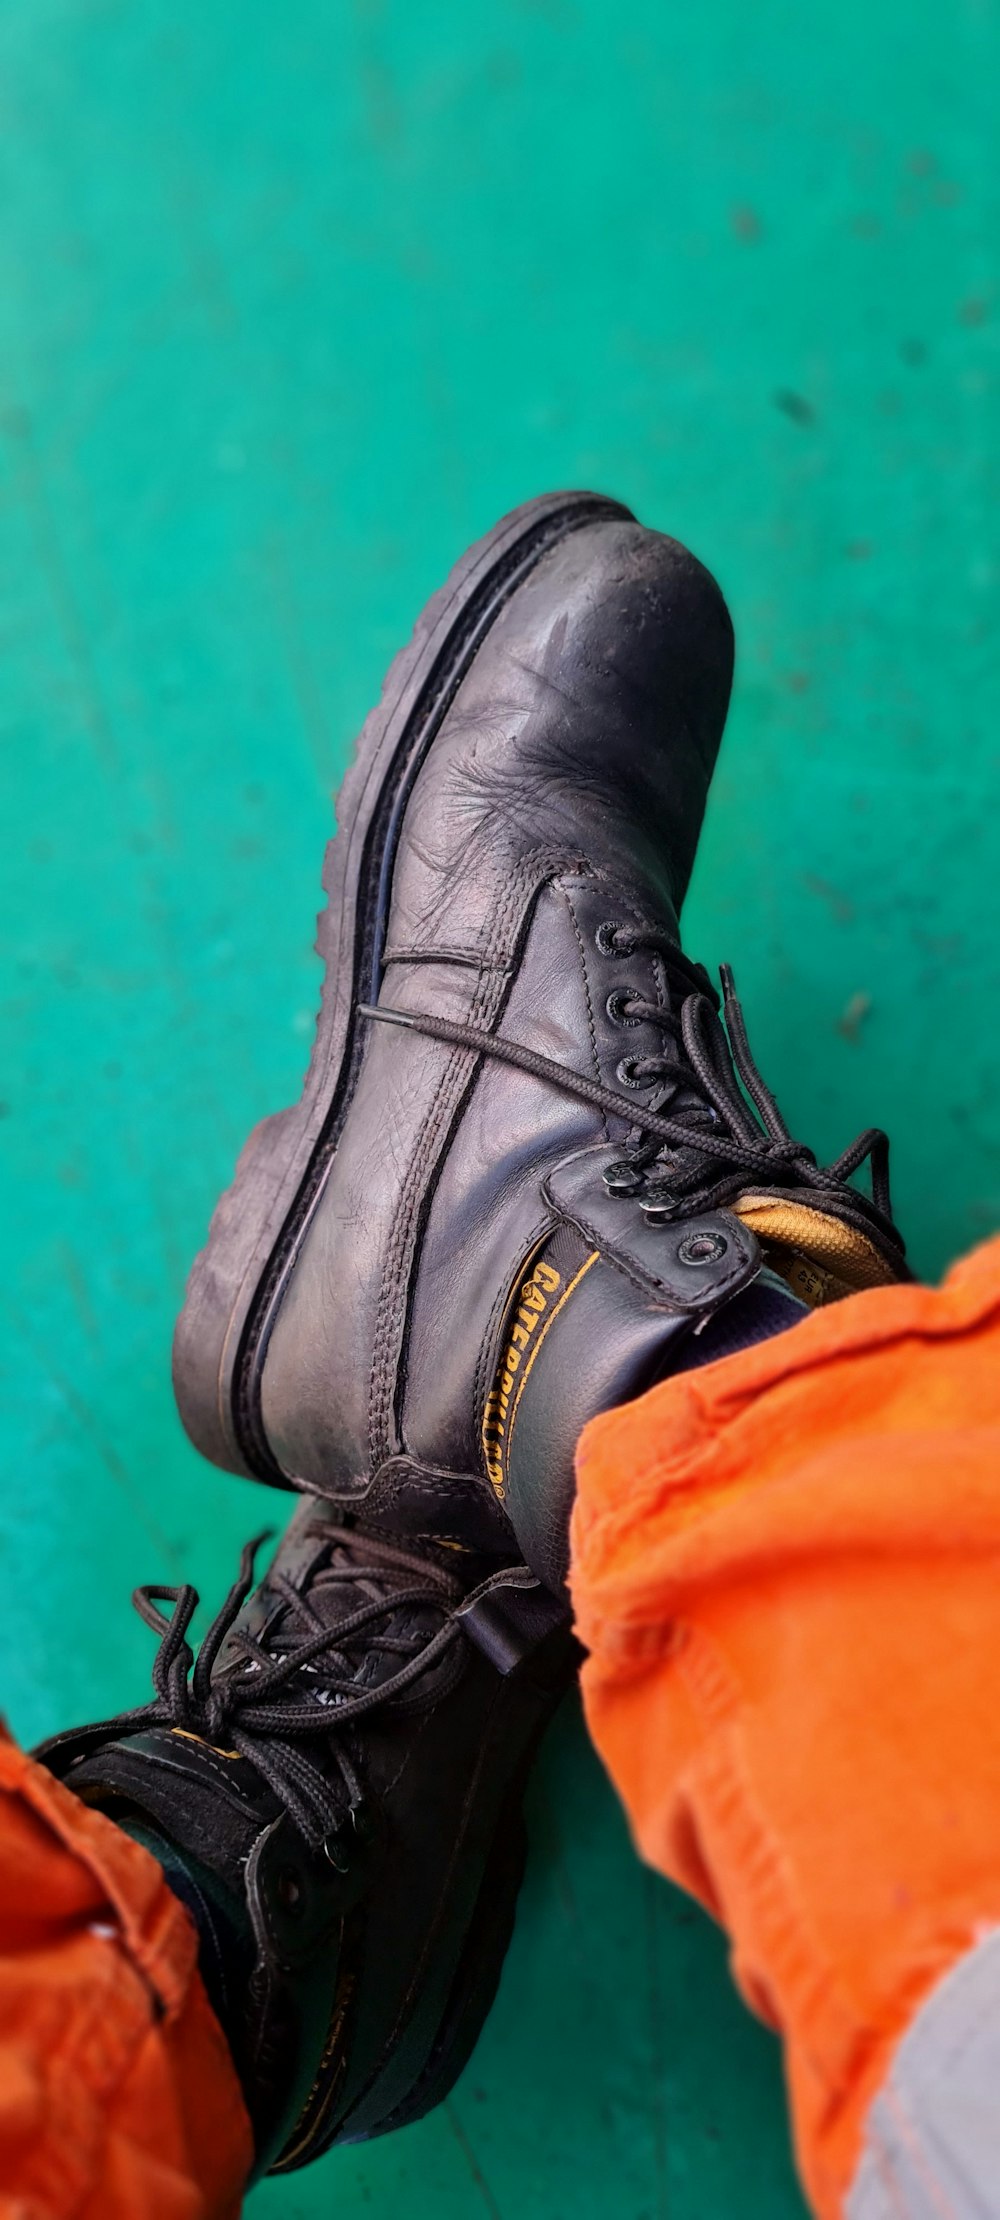 person wearing black leather work boot